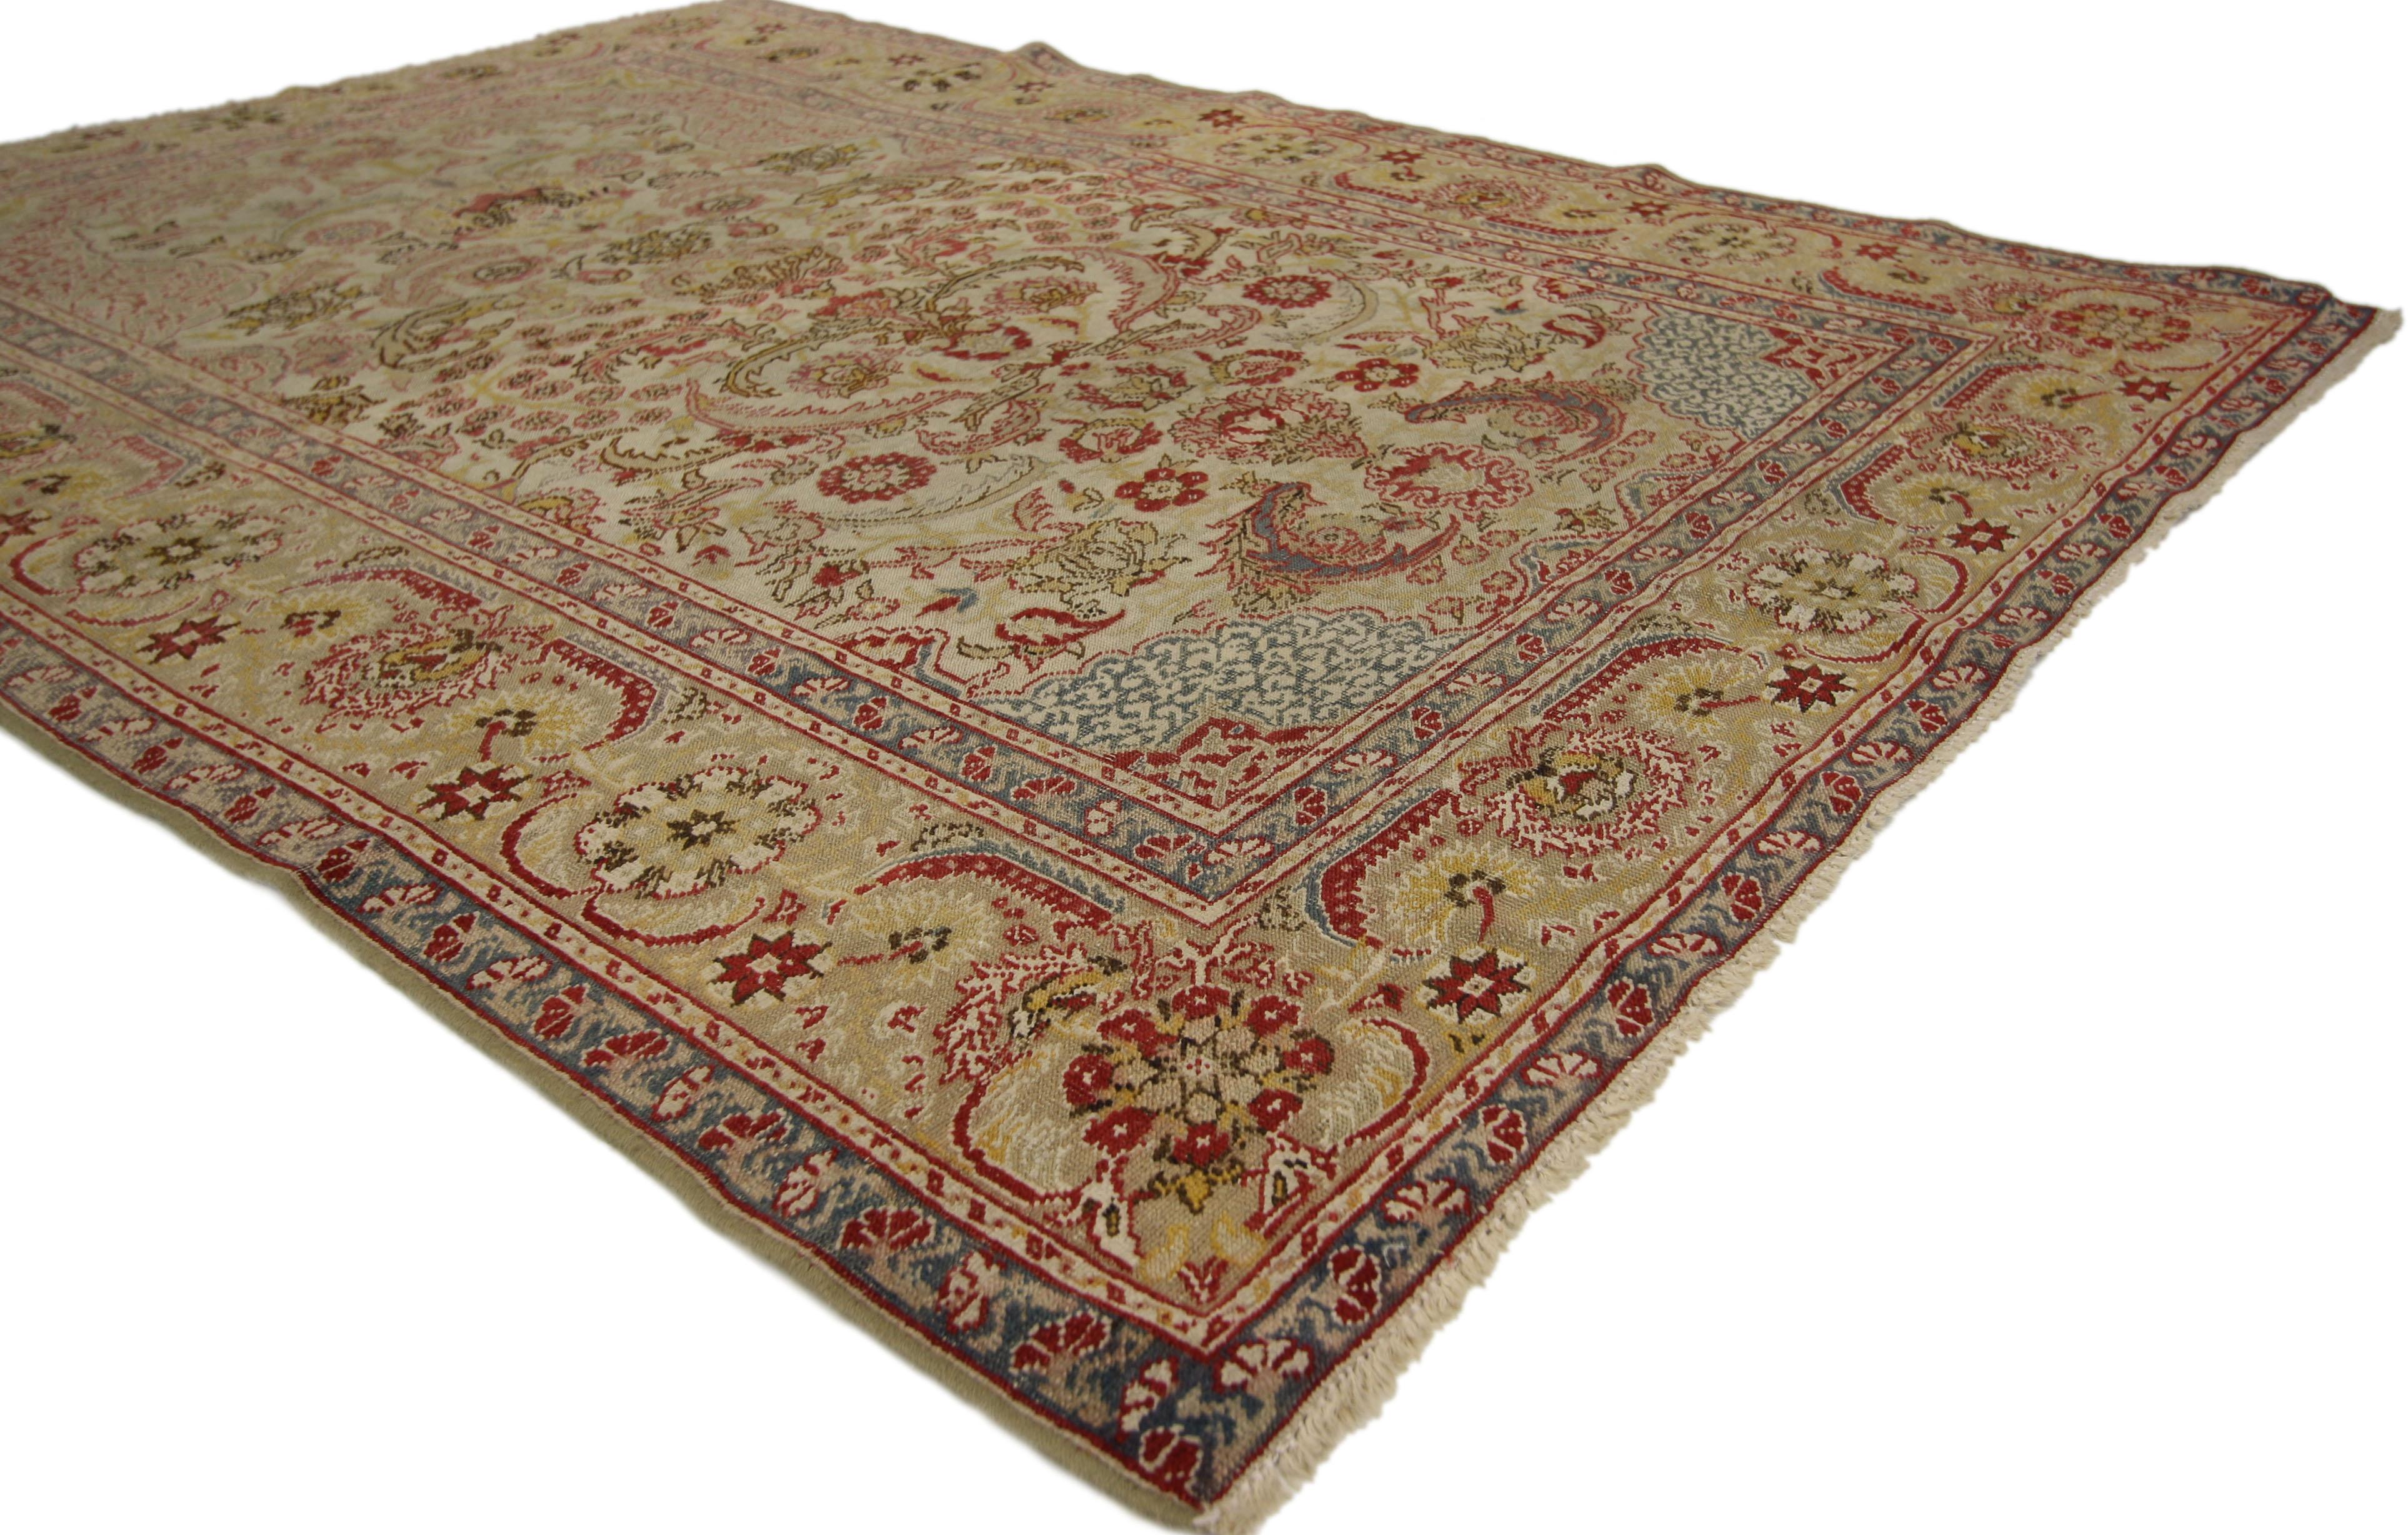 72175 distressed antique Turkish Hereke rug with rustic English Country Cottage style. Soft, bespoke vibes meet English Country Cottage style in this hand knotted wool distressed antique Turkish Hereke rug. The lovingly time-worn field features an